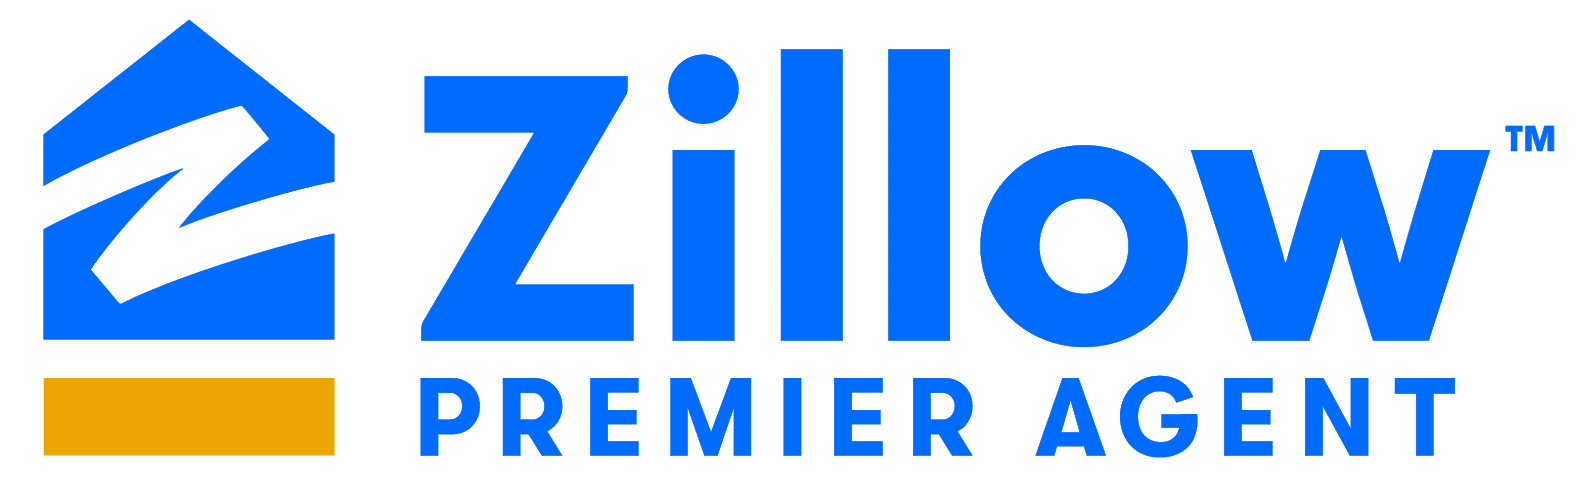 Zillow Premier Agent - How To Make Money As a Real Estate Agent